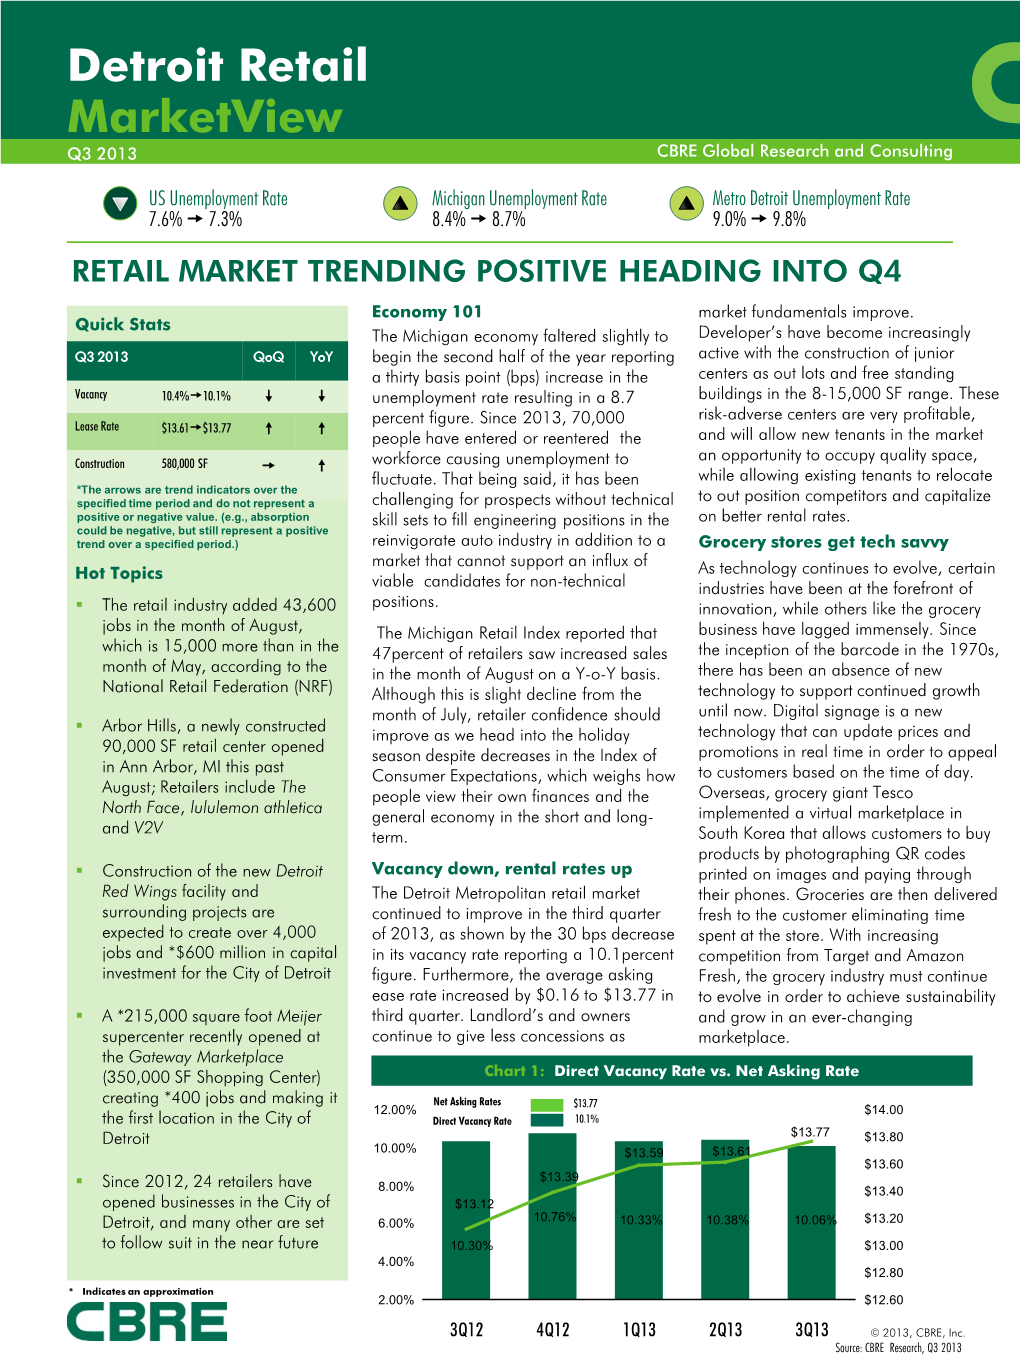 Detroit Retail Marketview Q3 2013 CBRE Global Research and Consulting